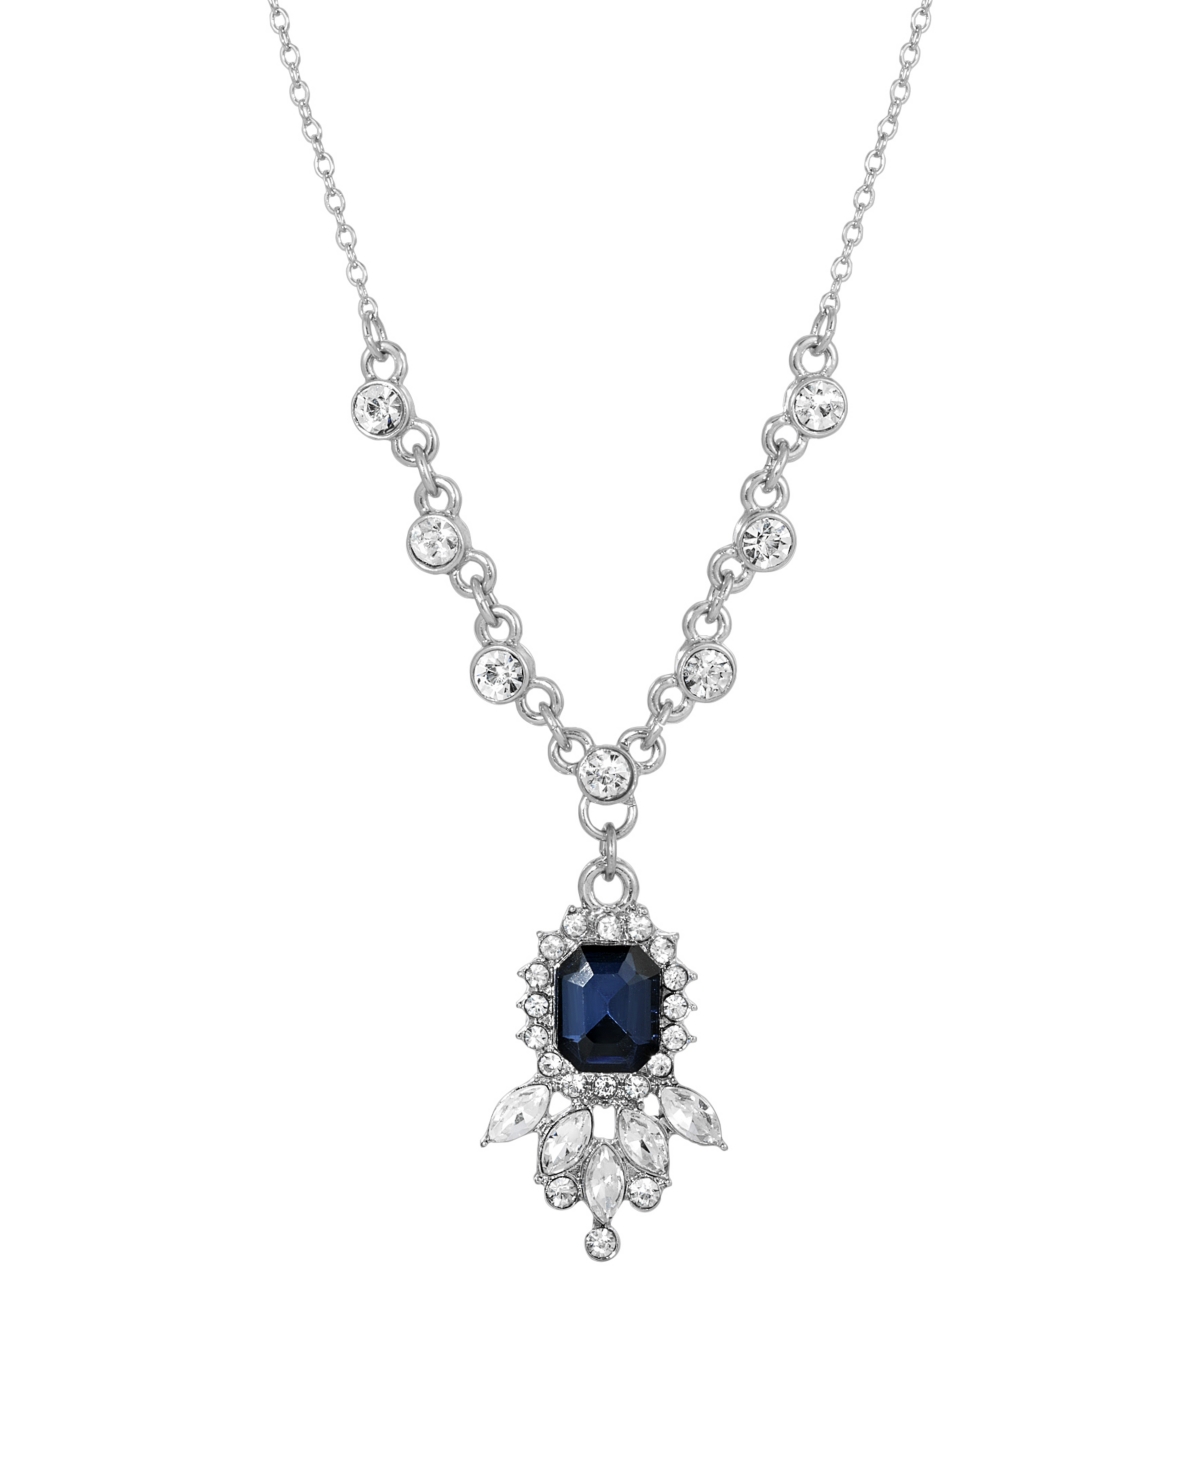 2028 Women's Silver Tone Blue And Crystal Pendant Necklace